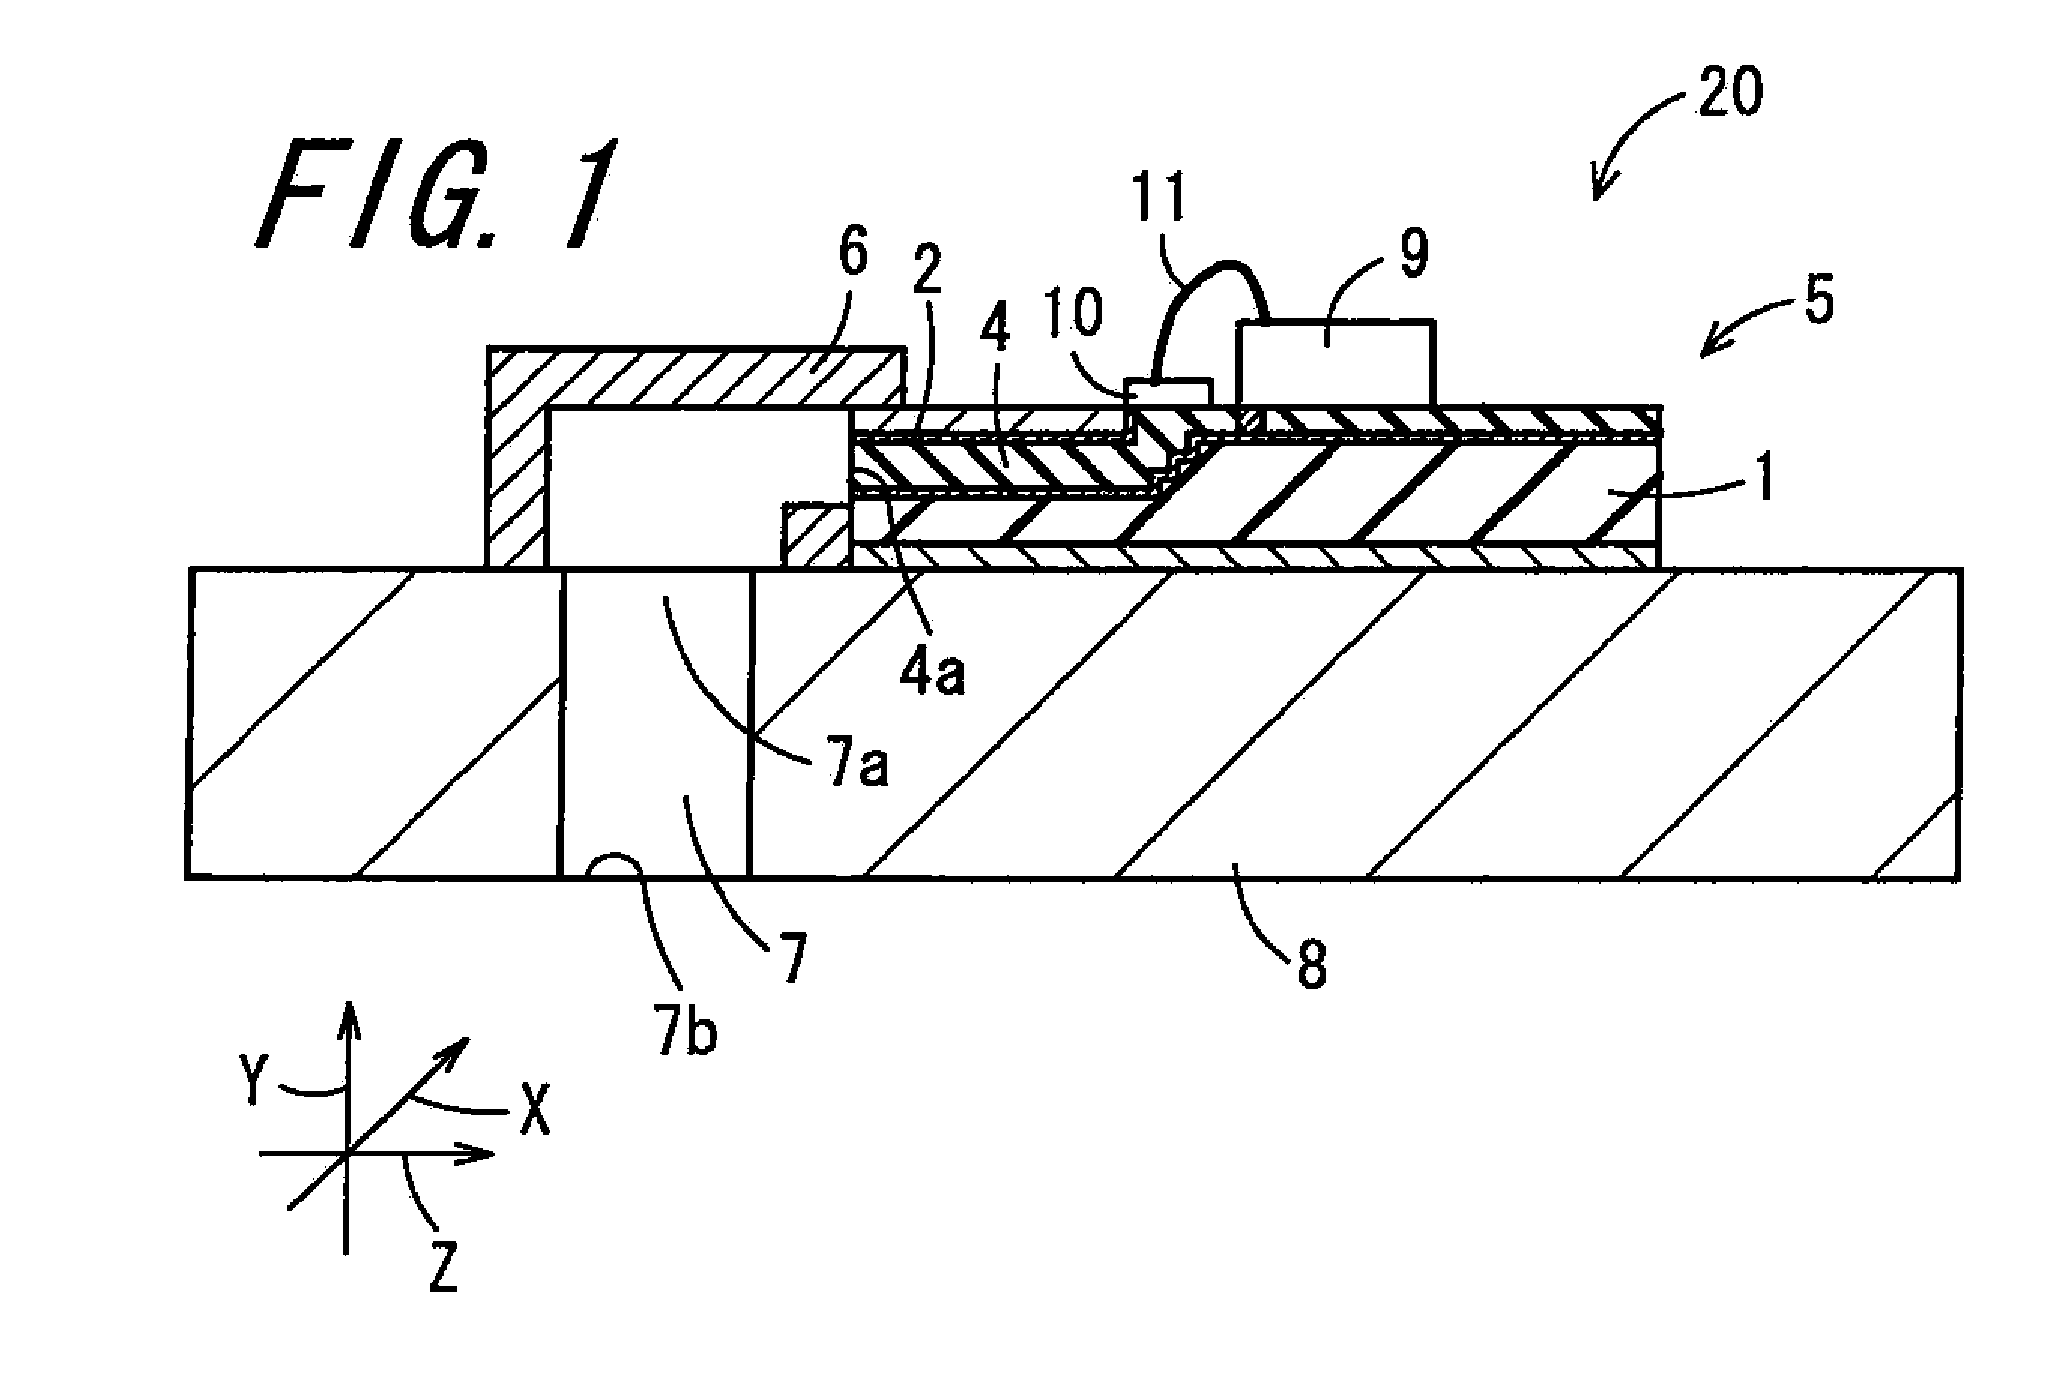 High-Frequency Module and Method of Manufacturing the Same, and Transmitter, Receiver, Transceiver, and Radar Apparatus Comprising the High-Frequency Module